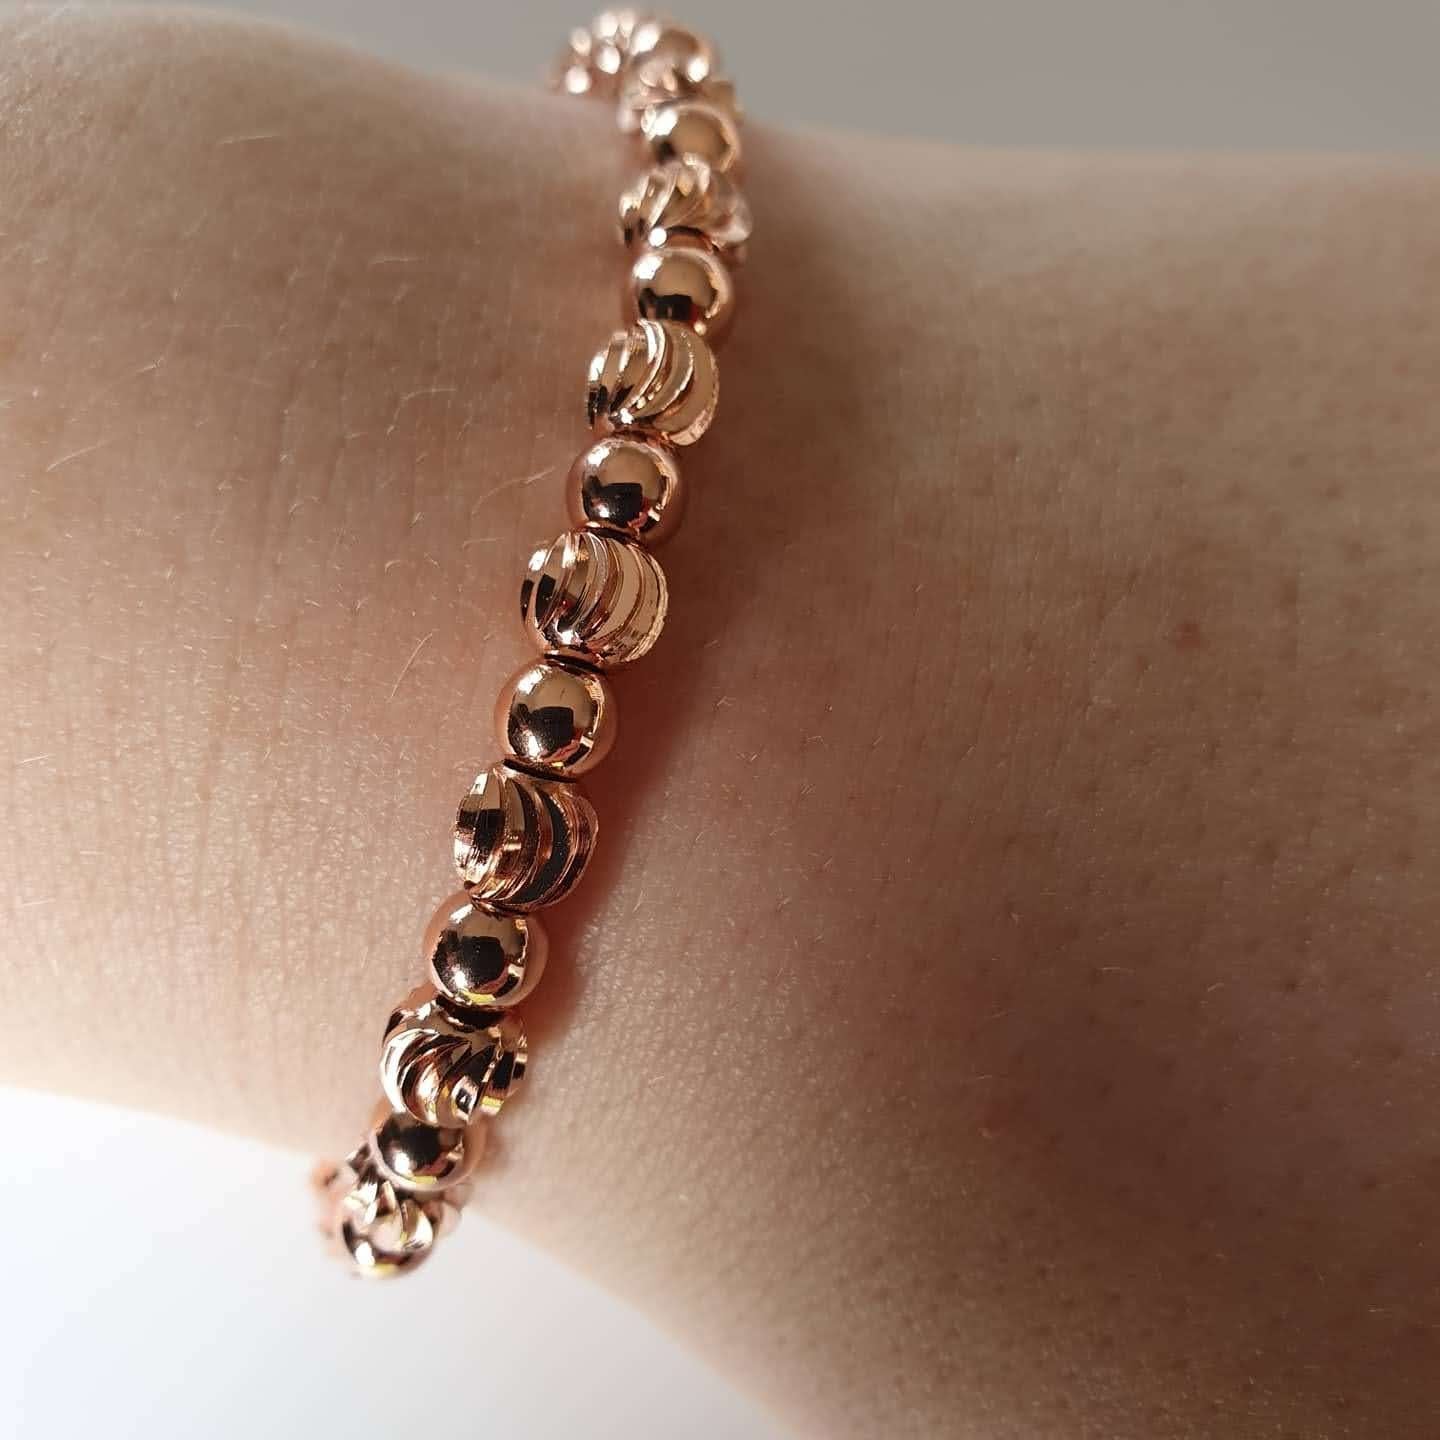 This is a picture of a rose gold bracelet on a wrist